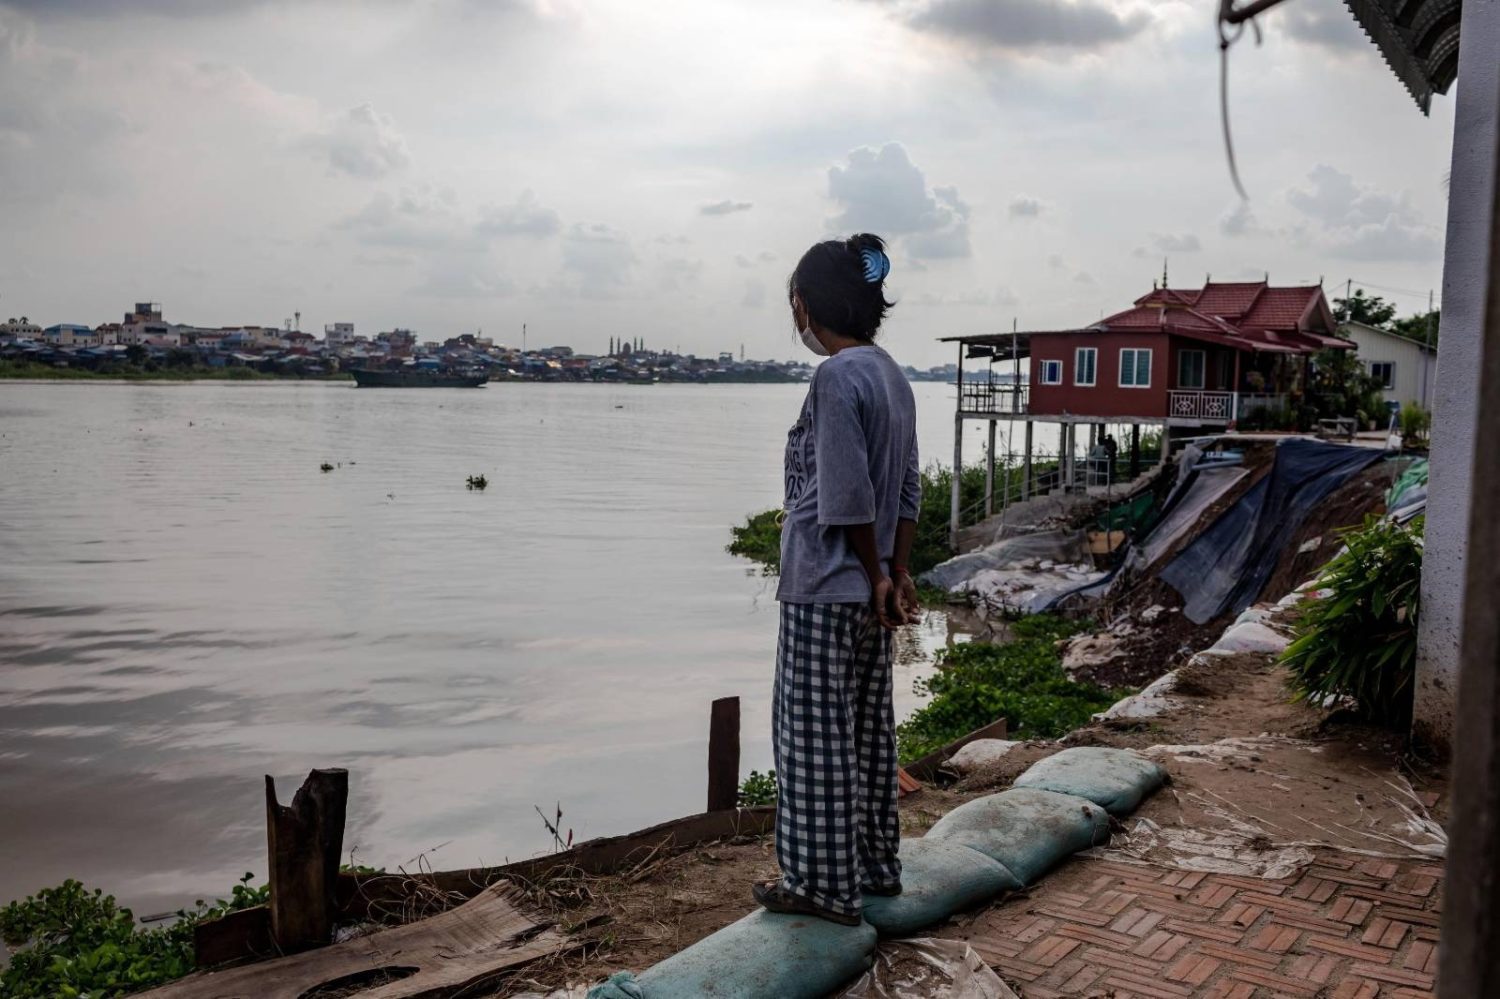 Ros Borany, 34, looks out over a collapsed riverbank in front of her house along the Tonle Sap river in Chroy Changva district's Prek Tasek commune on July 26, 2022. (Roun Ry/VOD)